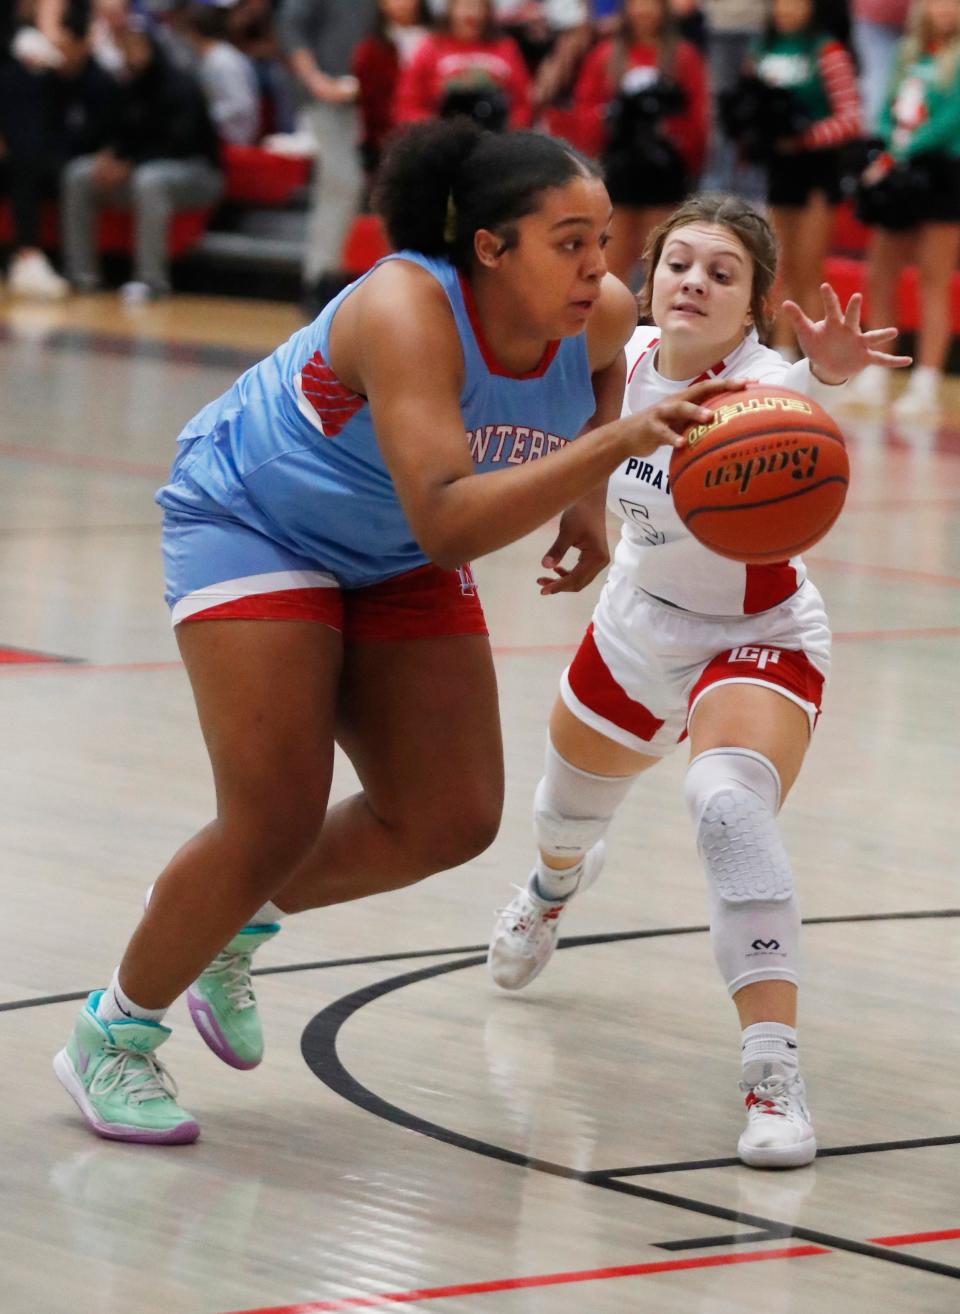 Monterey’s Kelly Mora (30) drives toward the basket against Lubbock-Cooper’s Peyton North (5) in a District 4-5A game Friday, Dec. 16, 2022 at Lubbock-Cooper High School in Woodrow, Texas.